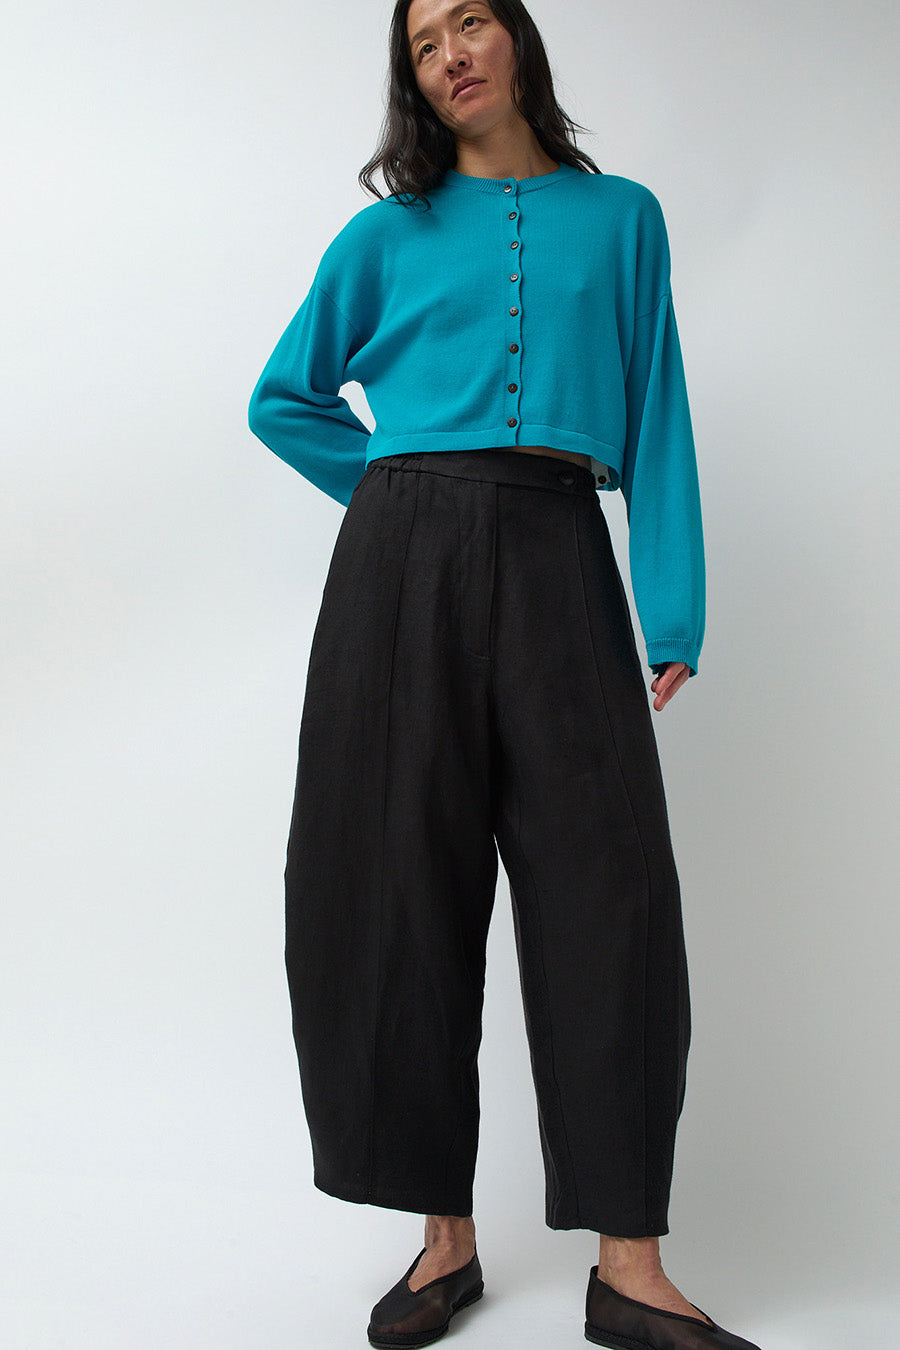 CORDERA Linen Curved Pants in Black